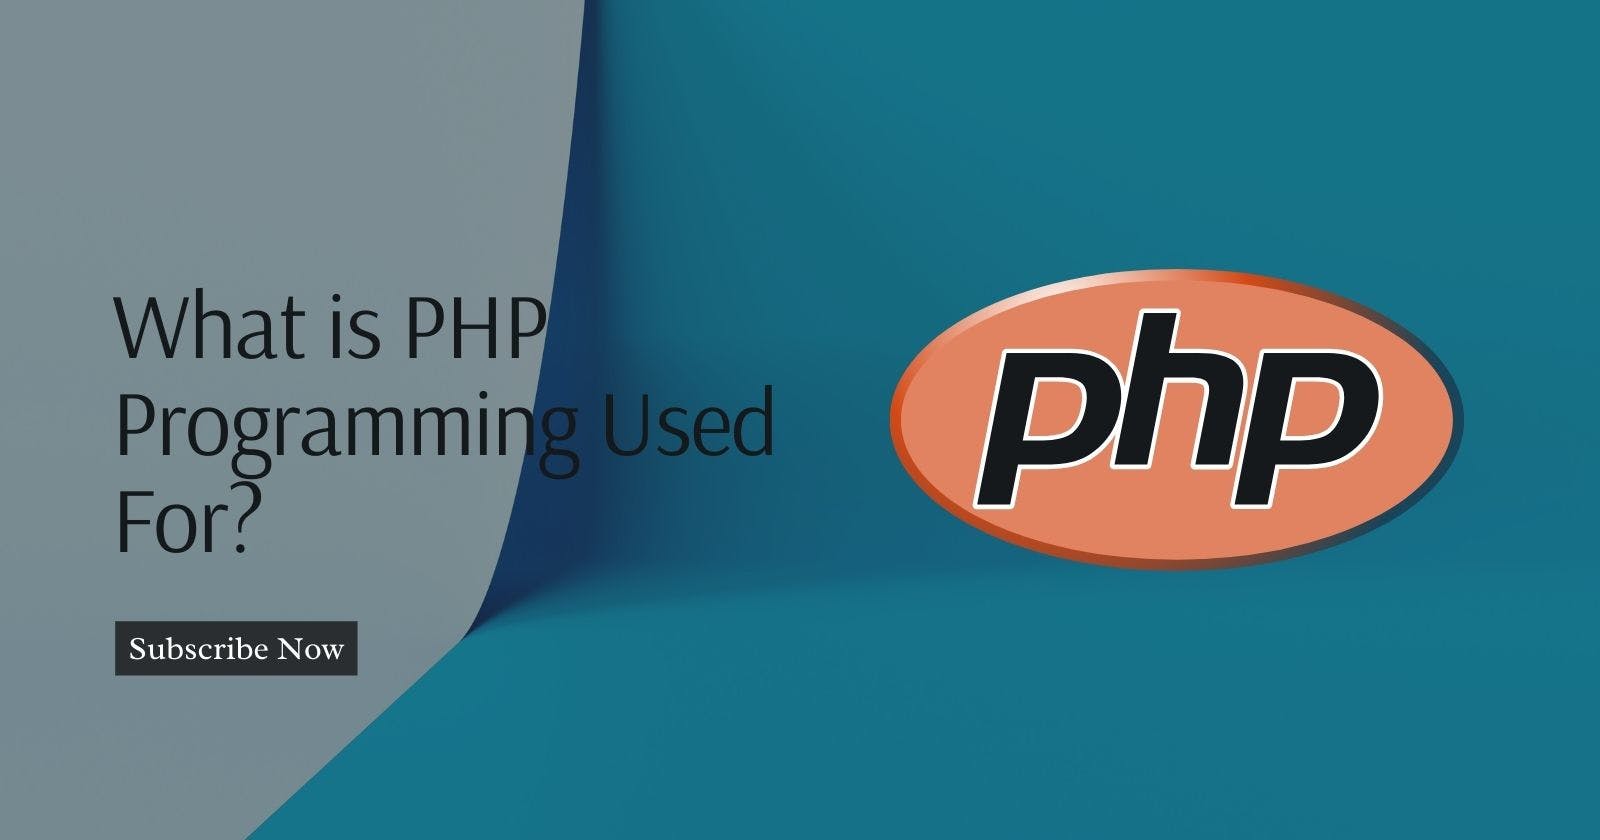 What is PHP Programming Used For?